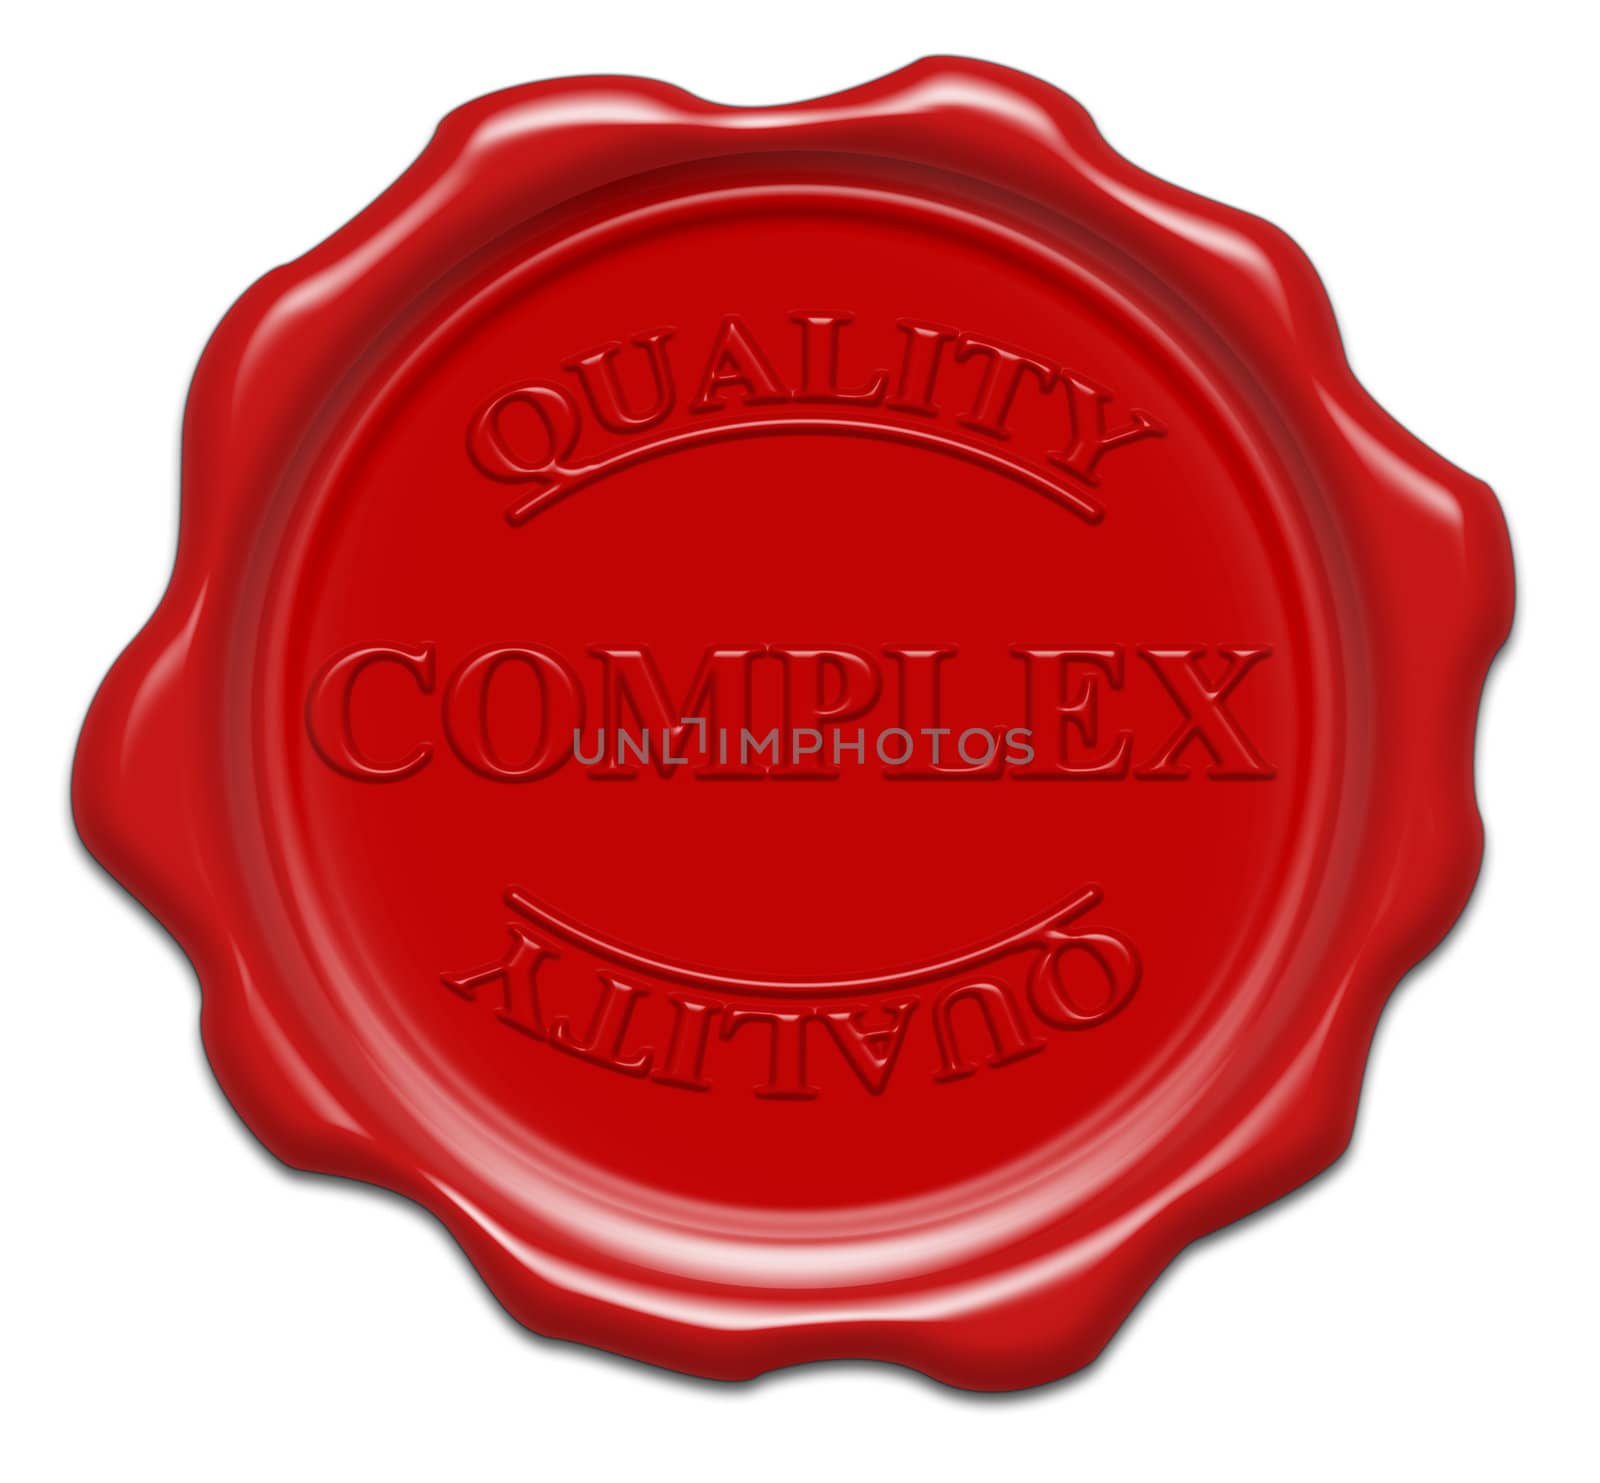 quality complex - illustration red wax seal isolated on white ba by mozzyb